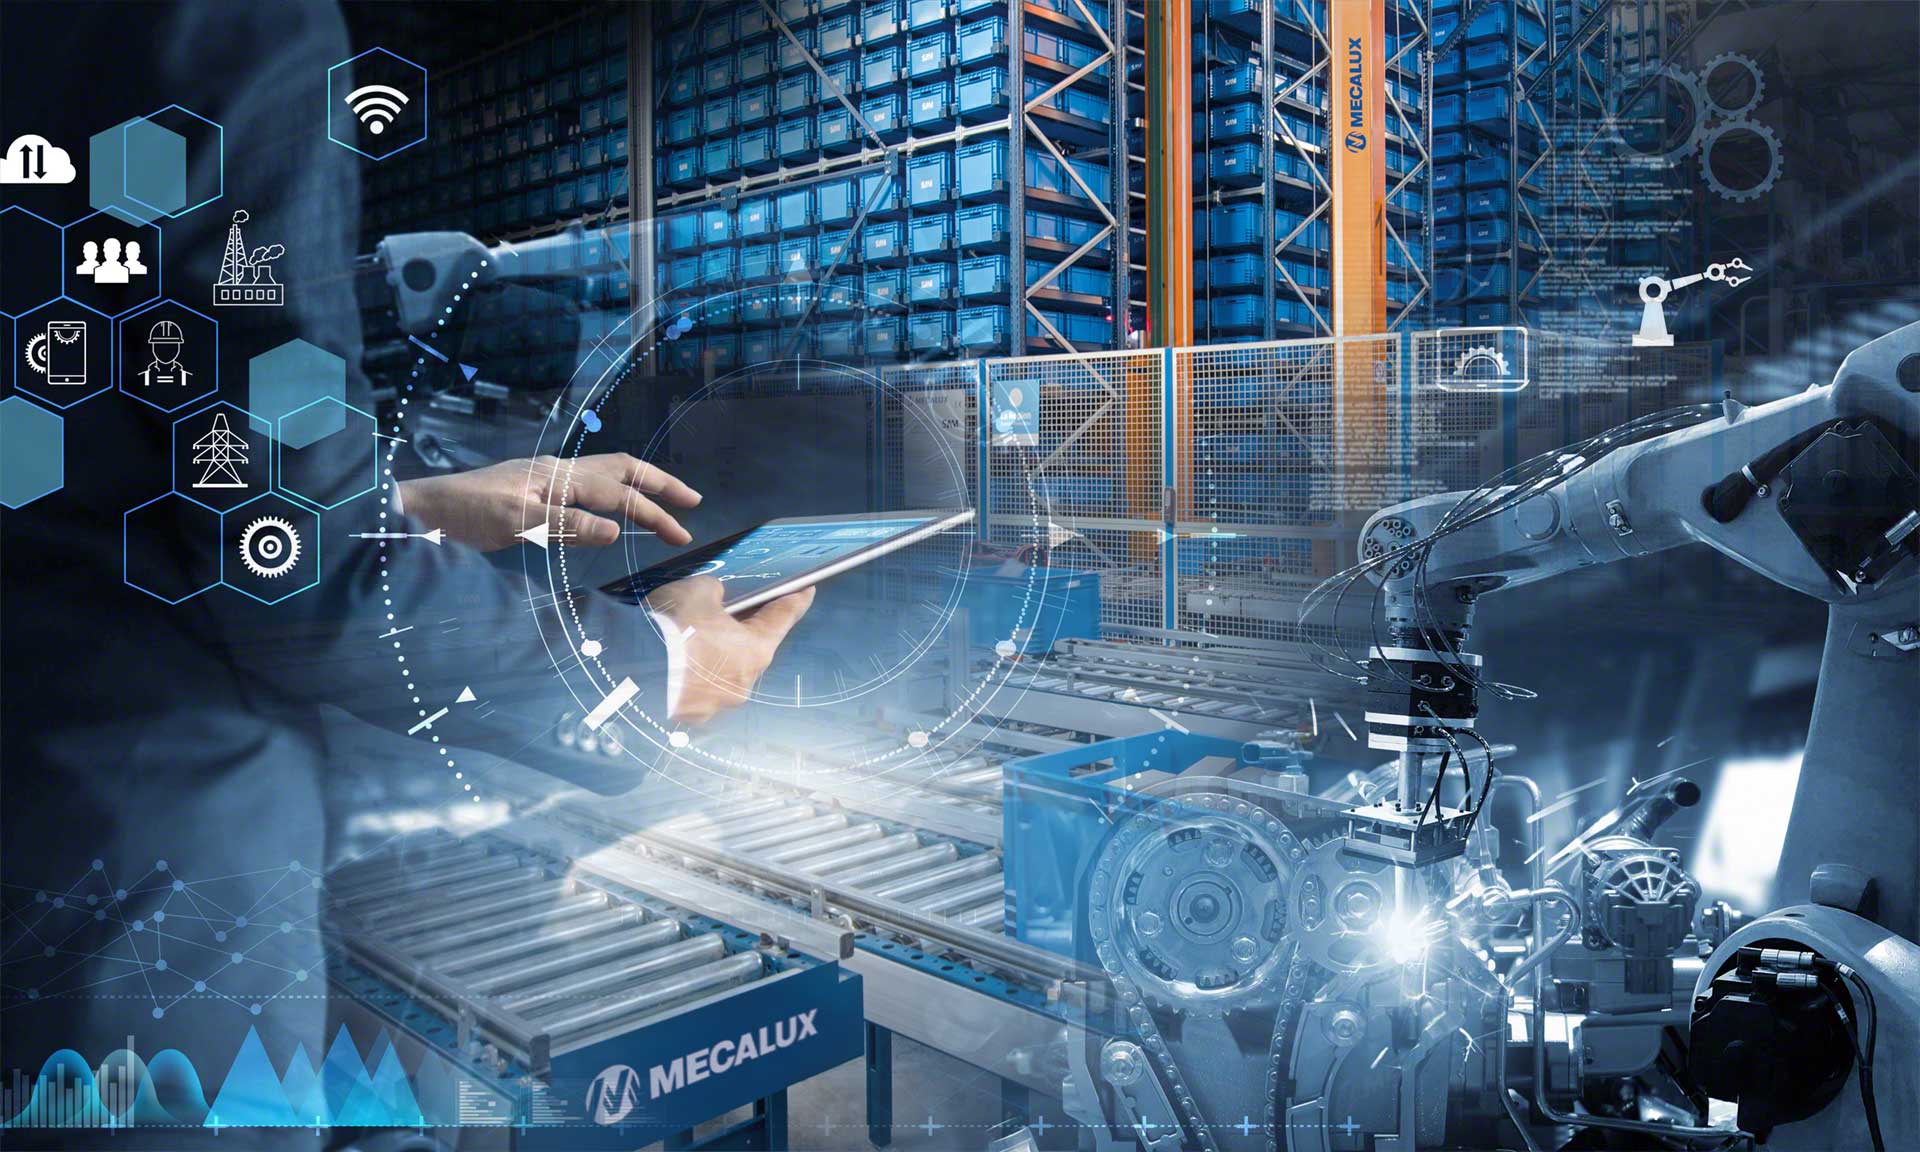 Automated logistics: distant future or at full force now?